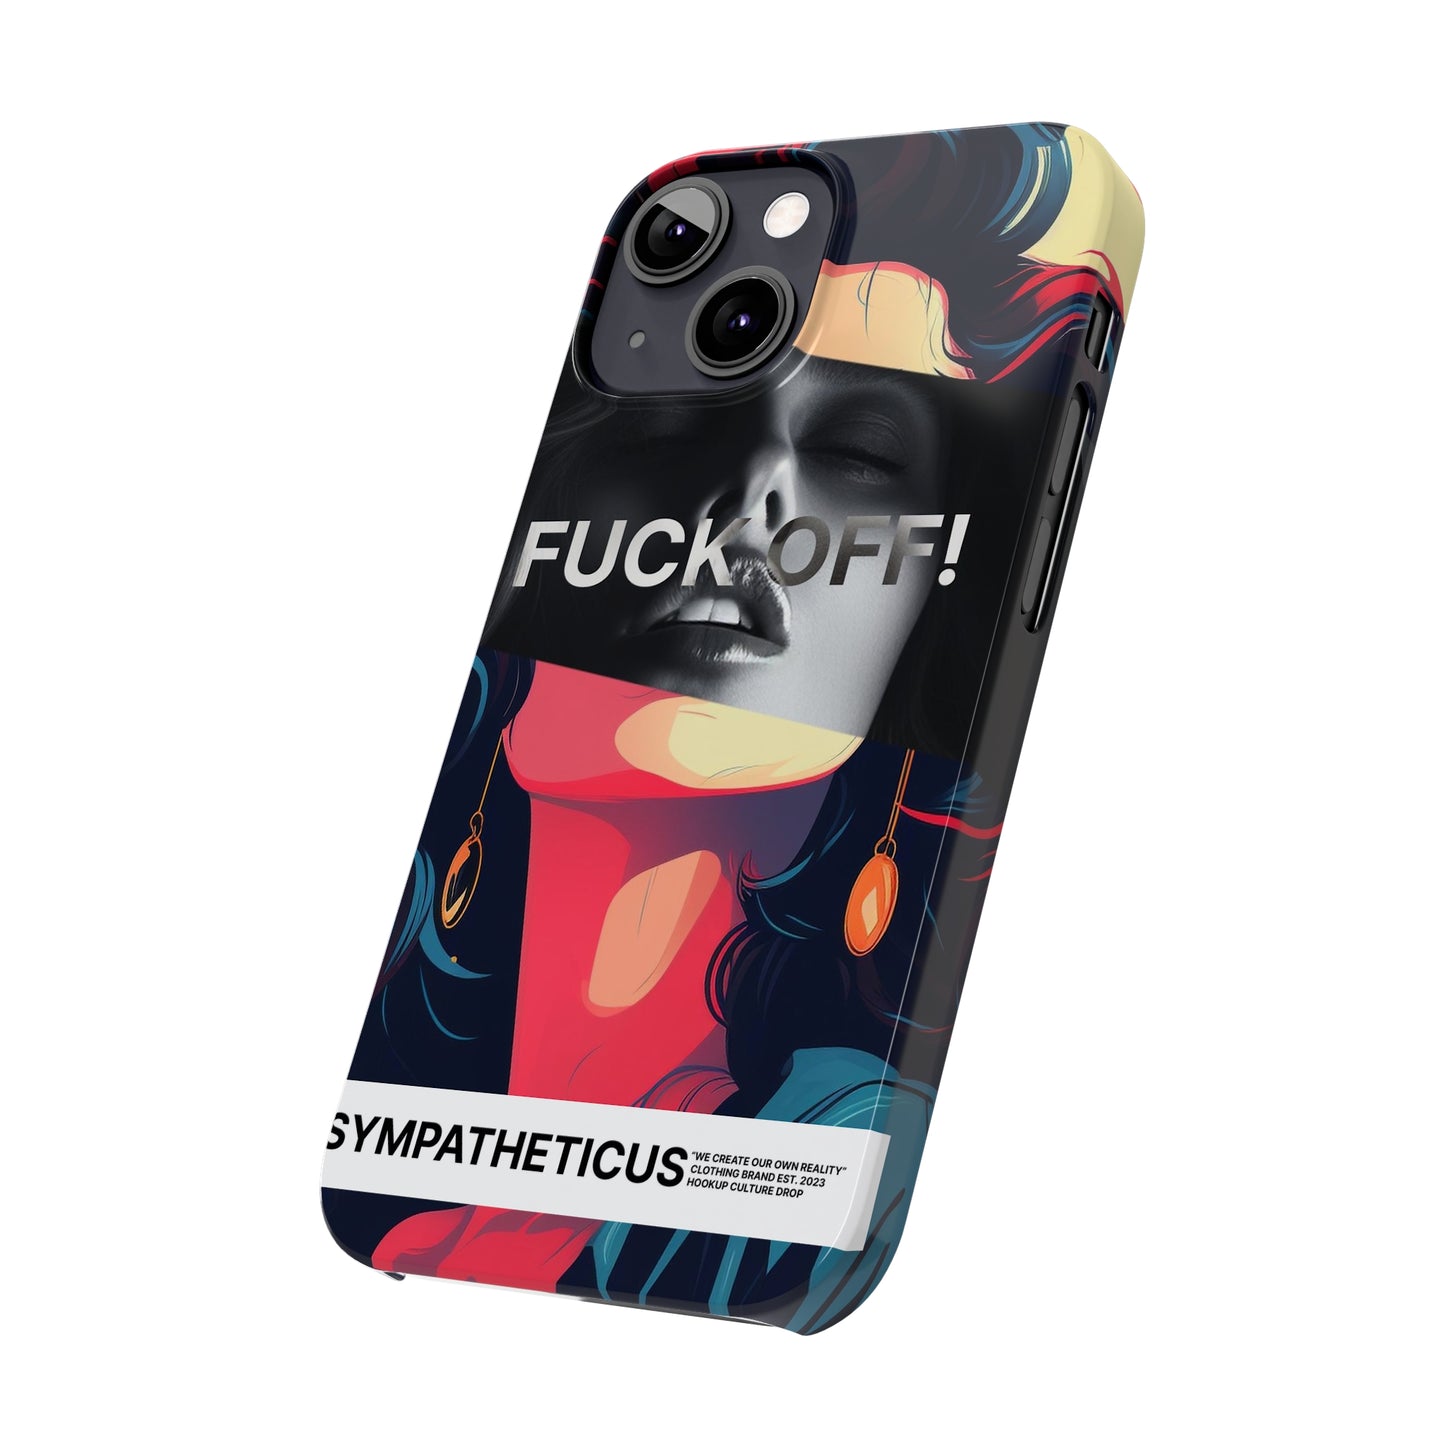 Hookup culture special iphone case-02